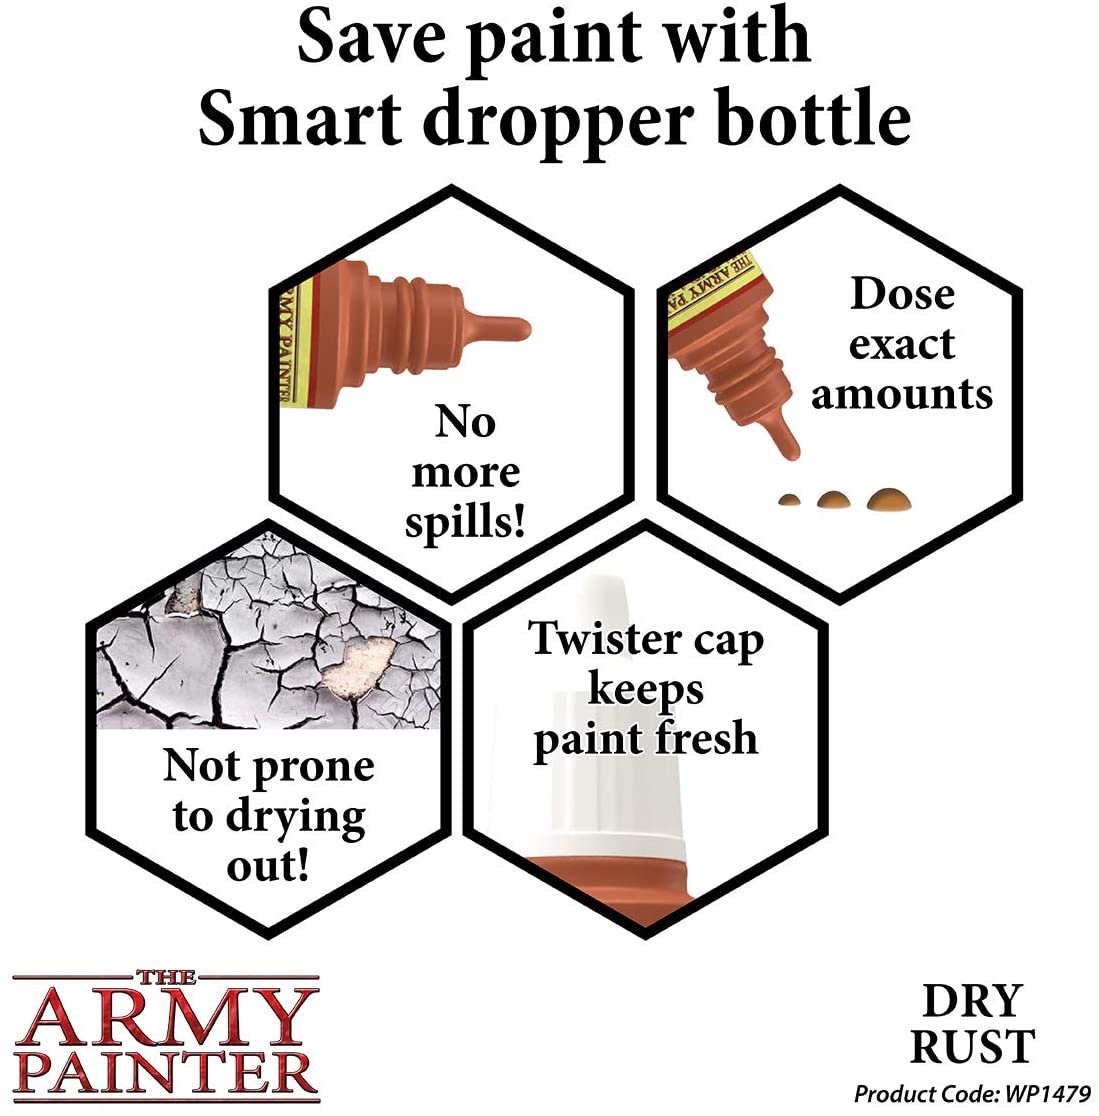 The Army Painter - Warpaints Effects: Dry Rust (18ml/0.6oz)